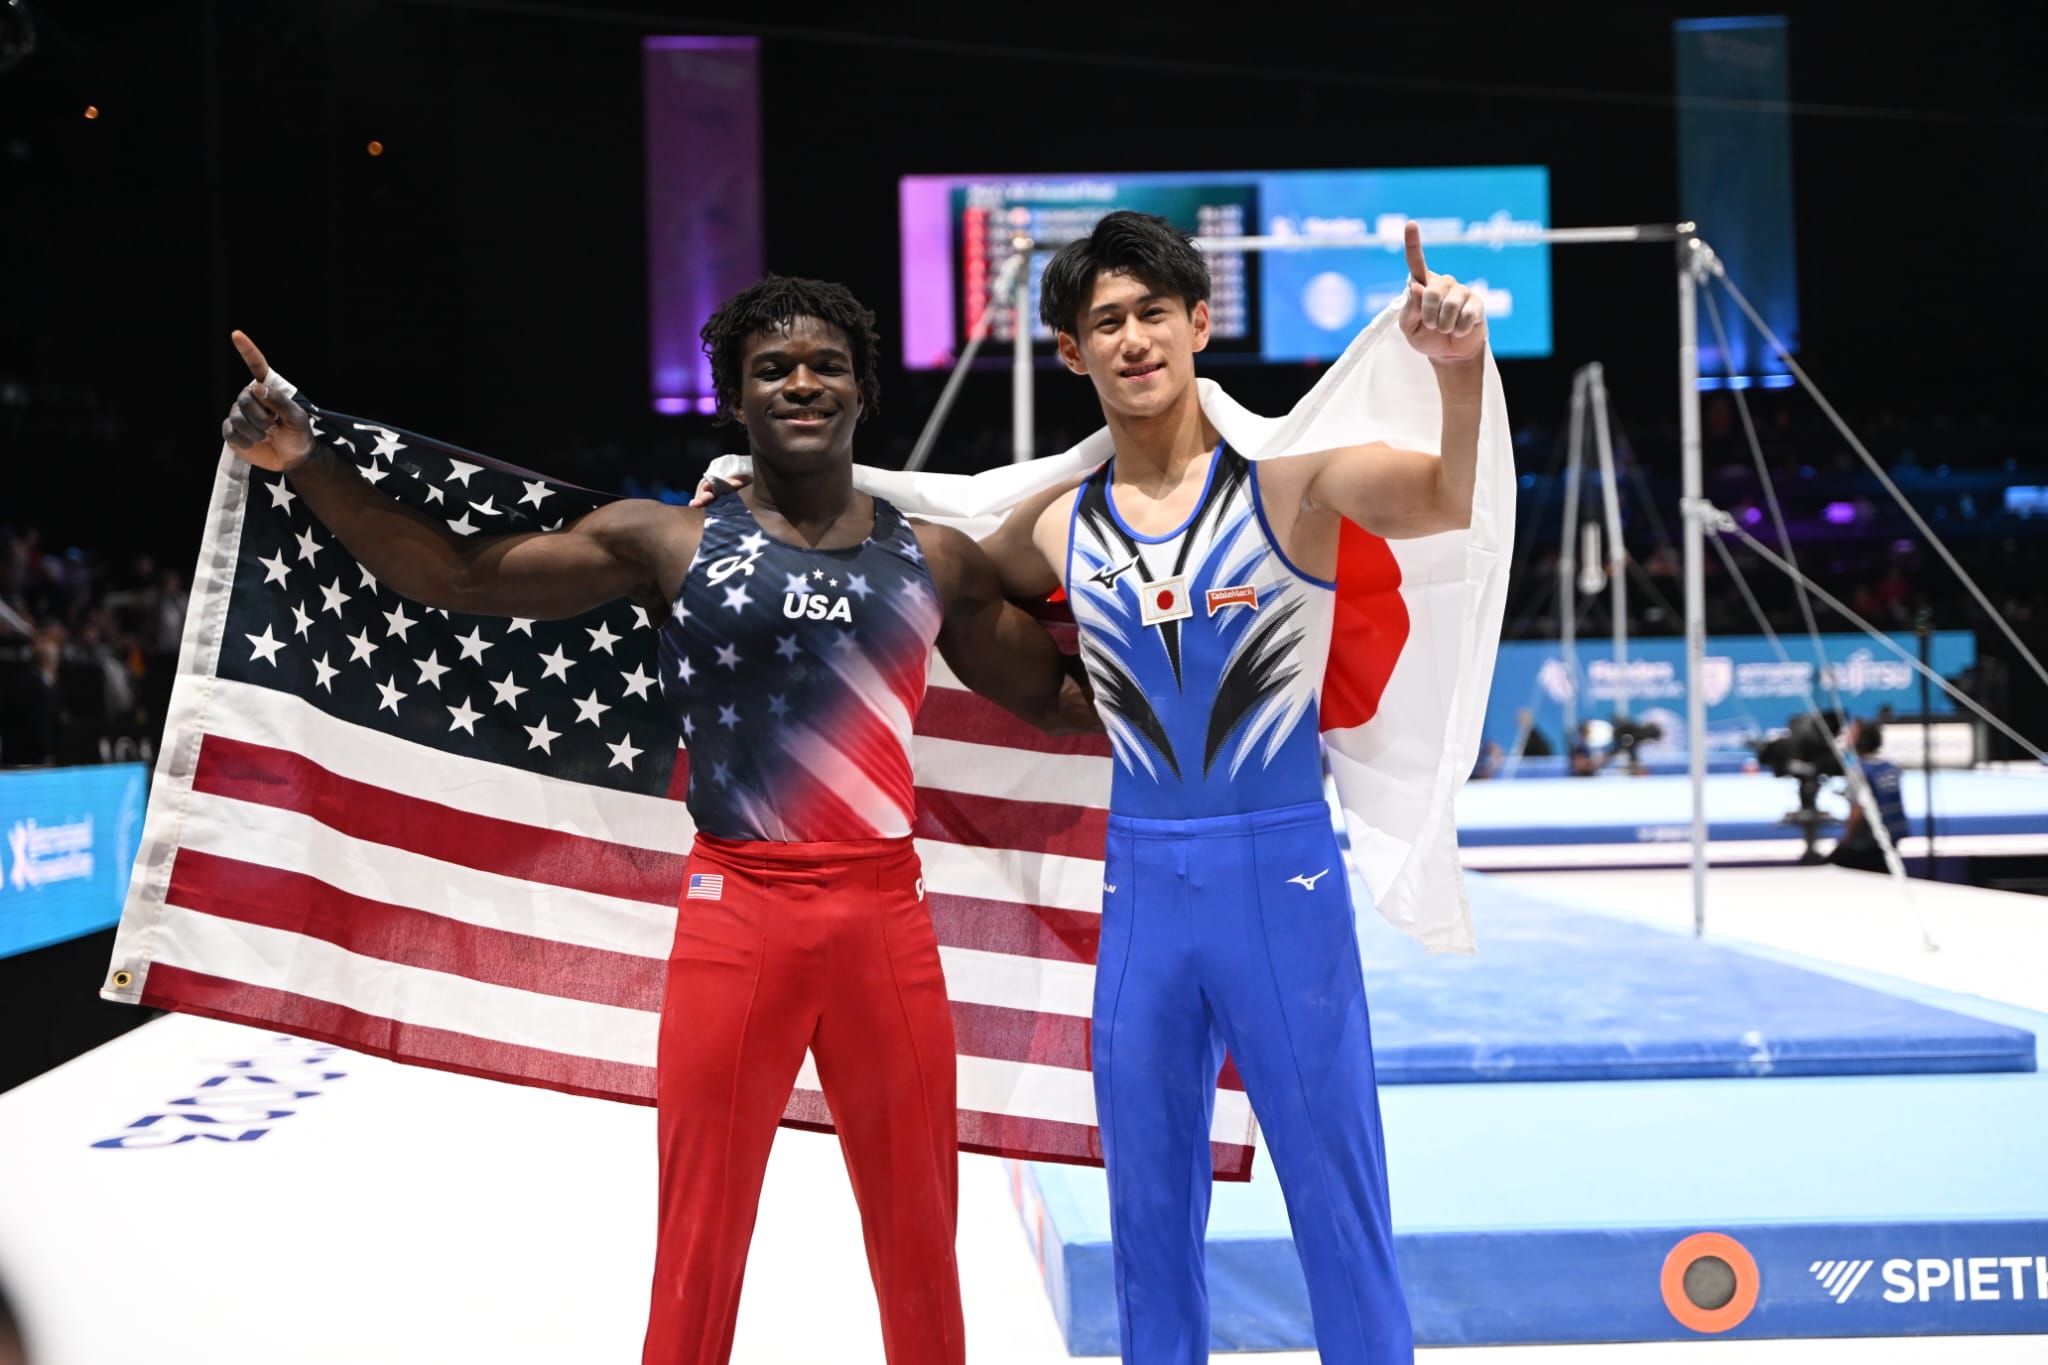 Fred Richard (left) and Hashimoto Daiki (right) raise their flag s after winning bronze and gold, respectivley, during the 2023 World Artisitc Gymnastics Championships.